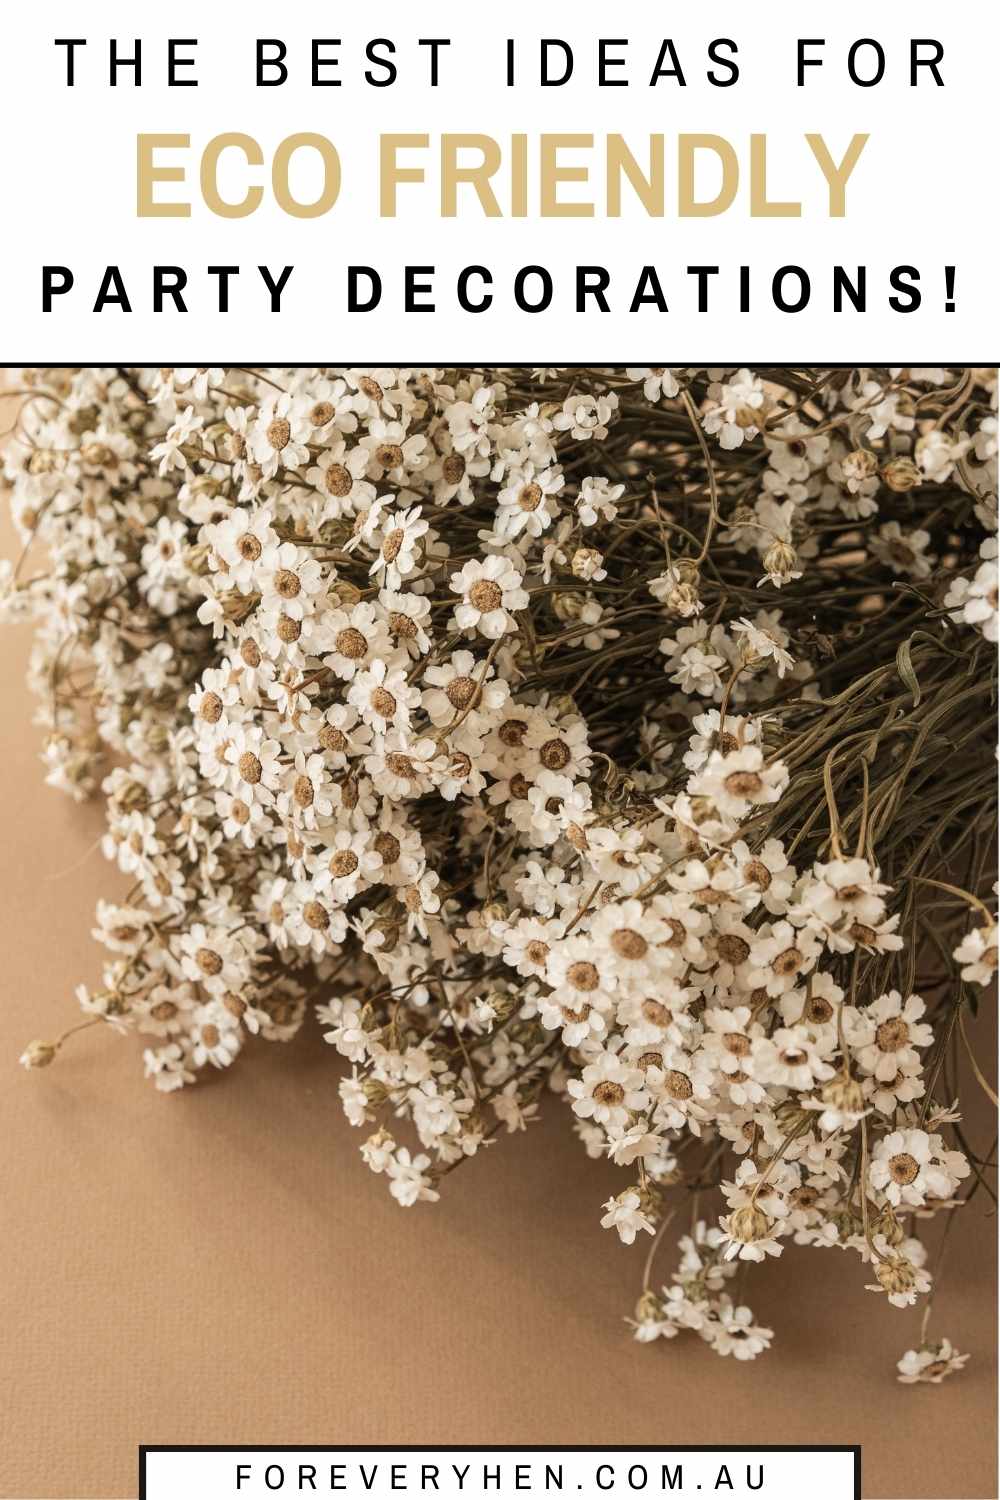 Image of dried daisy flowers in a bunch. Text overlay: The best ideas for eco friendly party decorations!